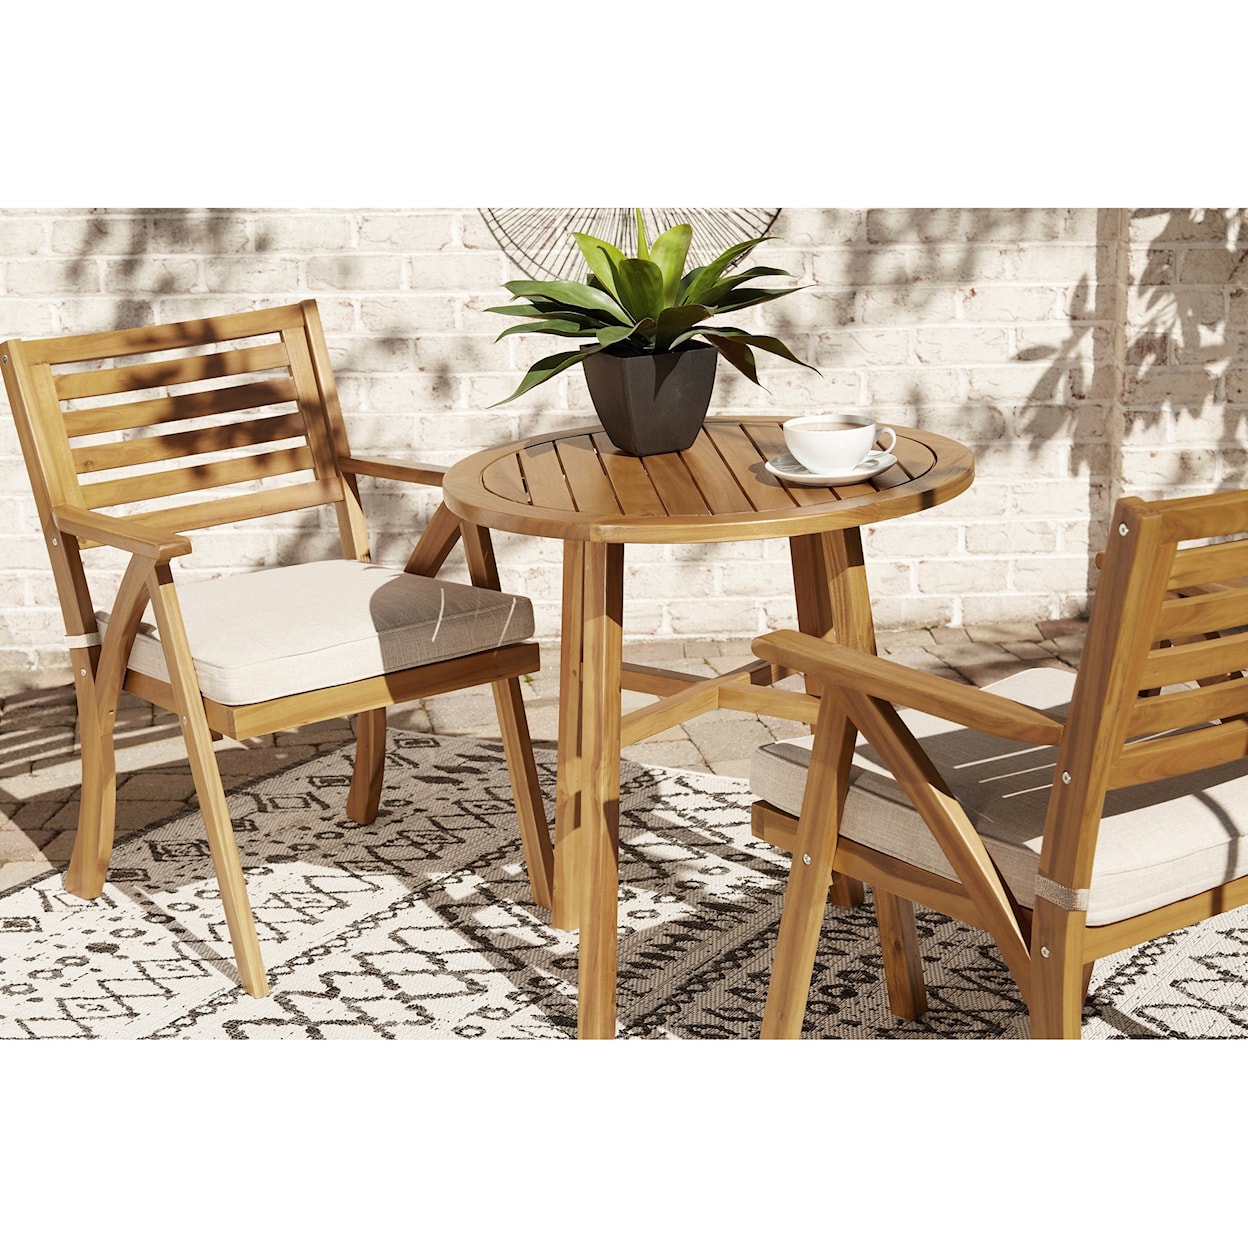 Signature Design Vallerie 3-Piece Table & Chairs with Cushion Set